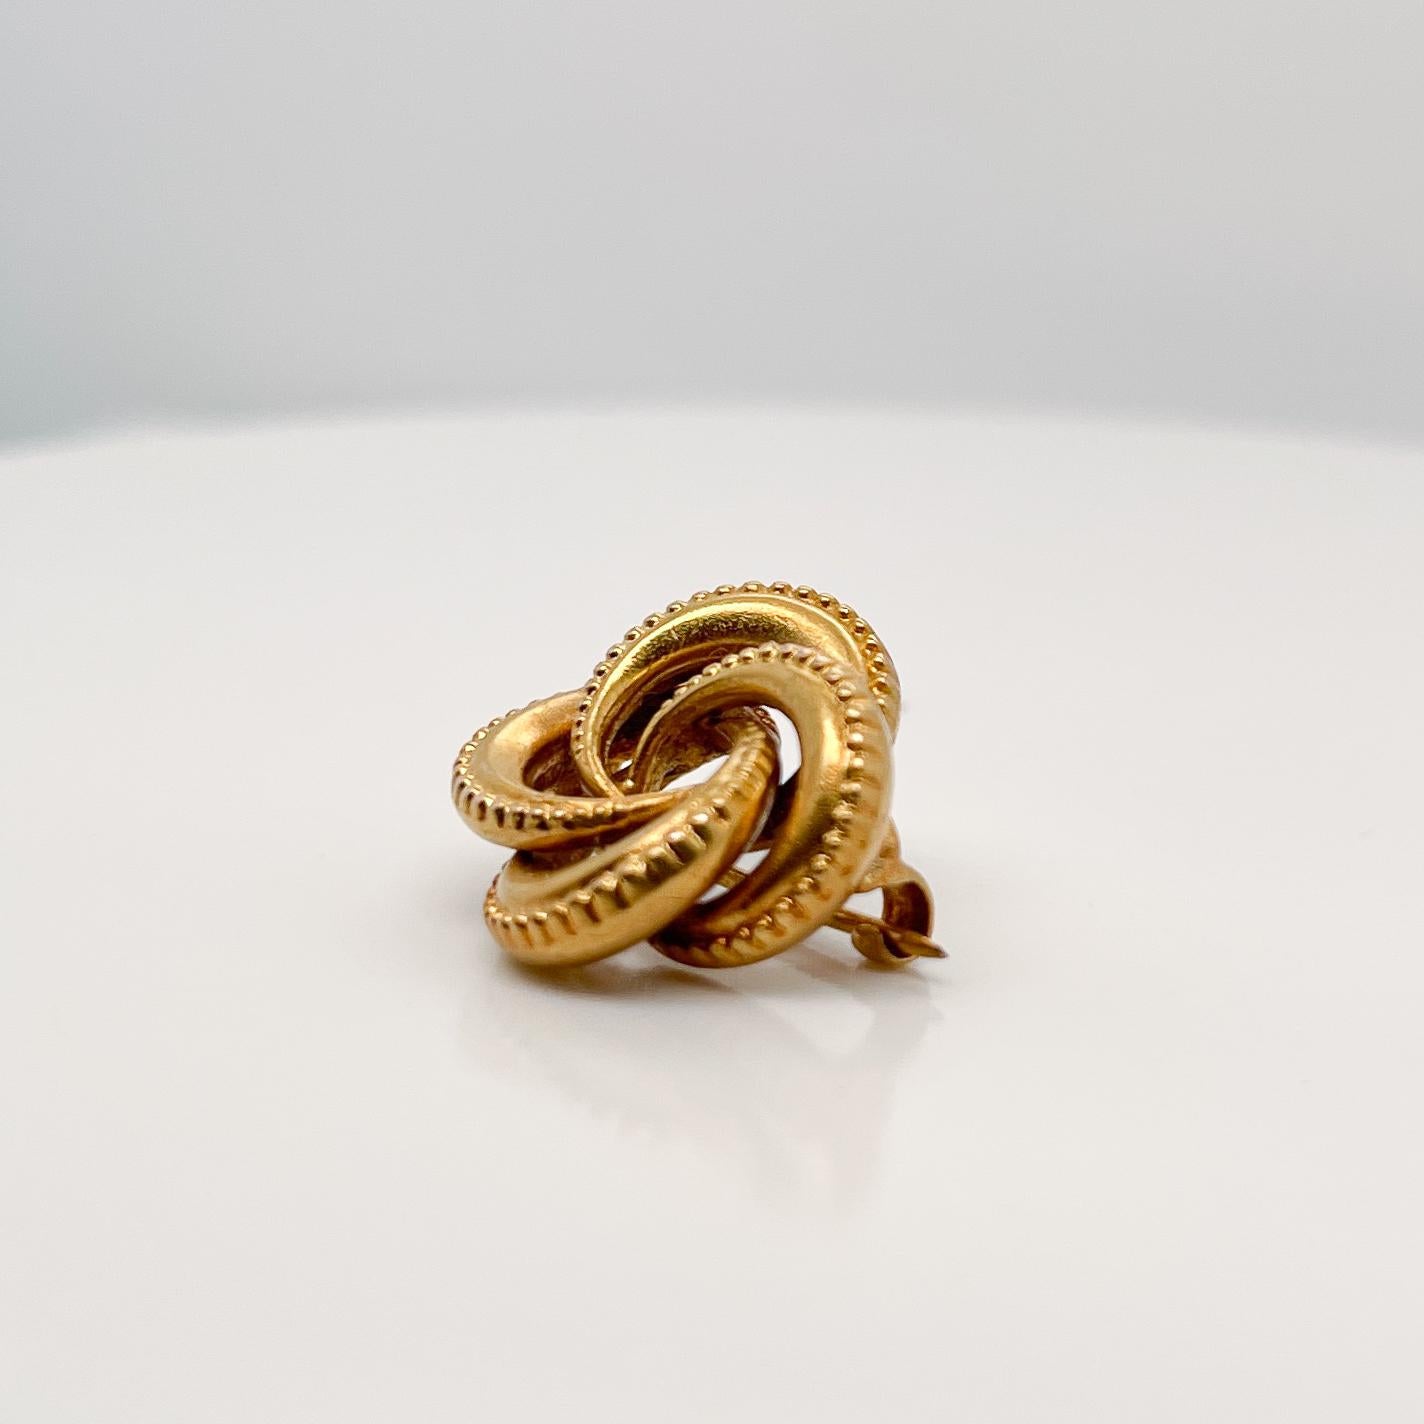 Edwardian 18 Karat Gold Love Knot Brooch or Pin In Good Condition For Sale In Philadelphia, PA